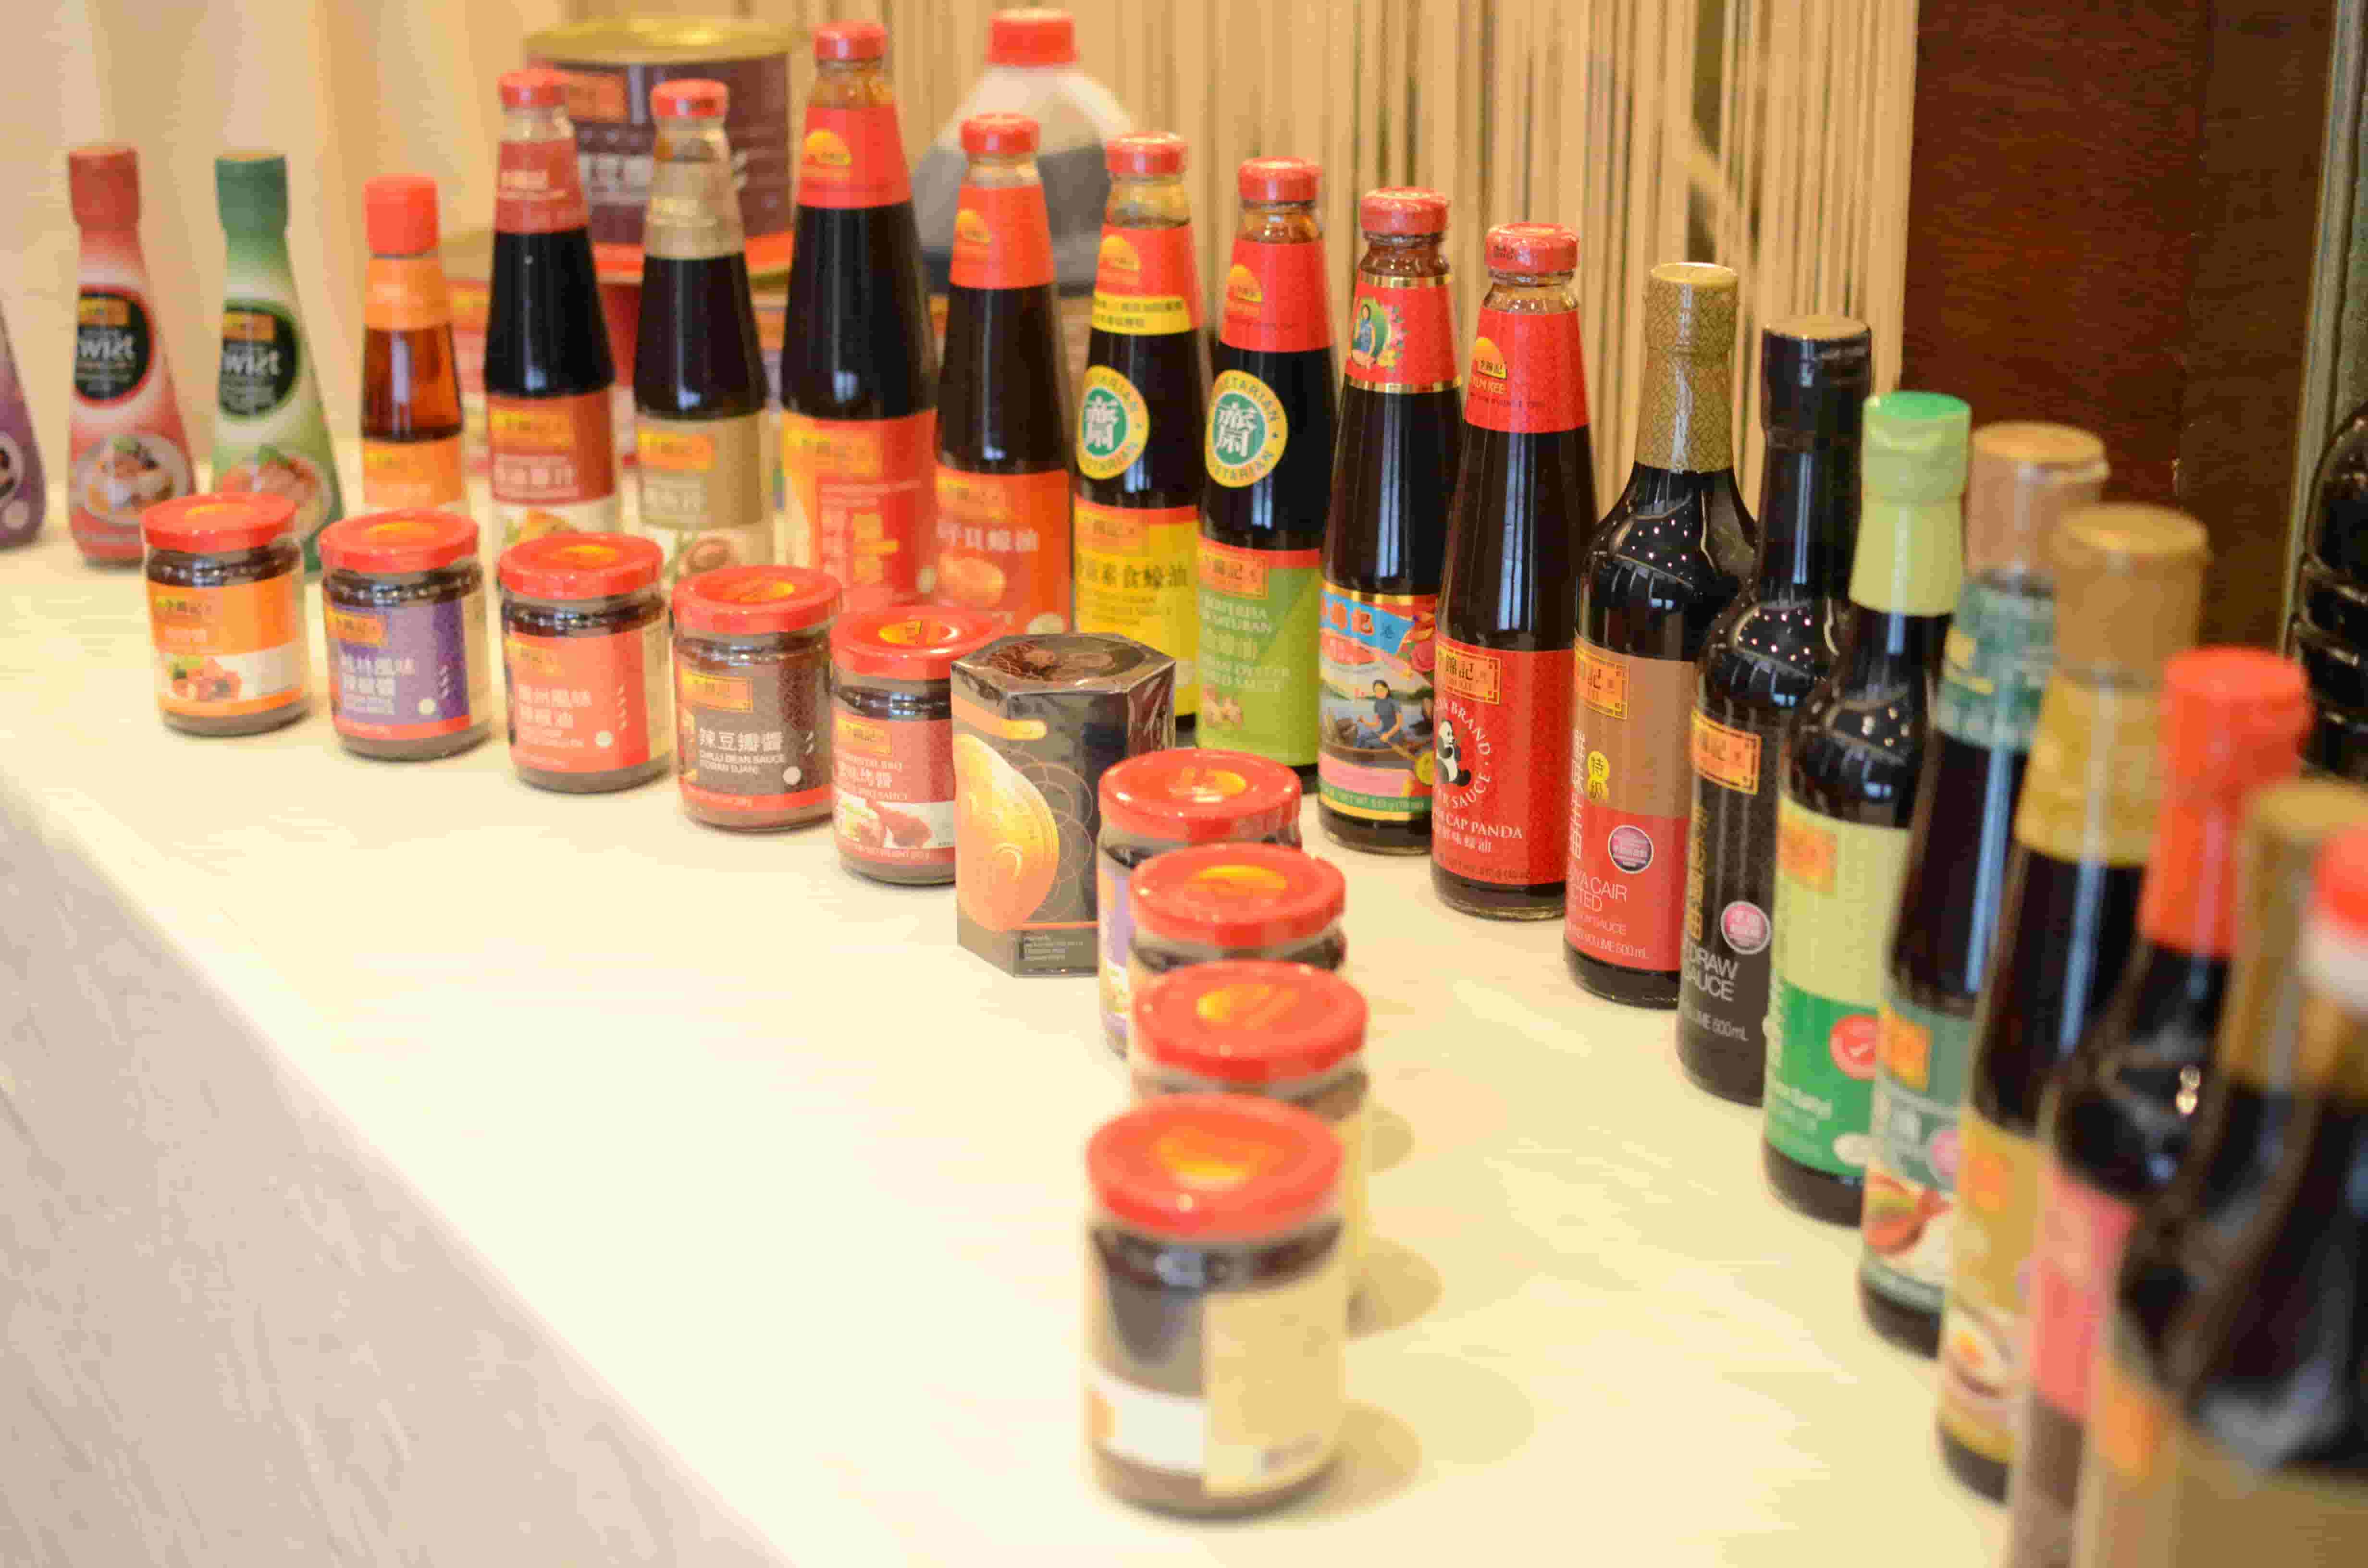 lee kum kee condiments and sauces product over 130 years